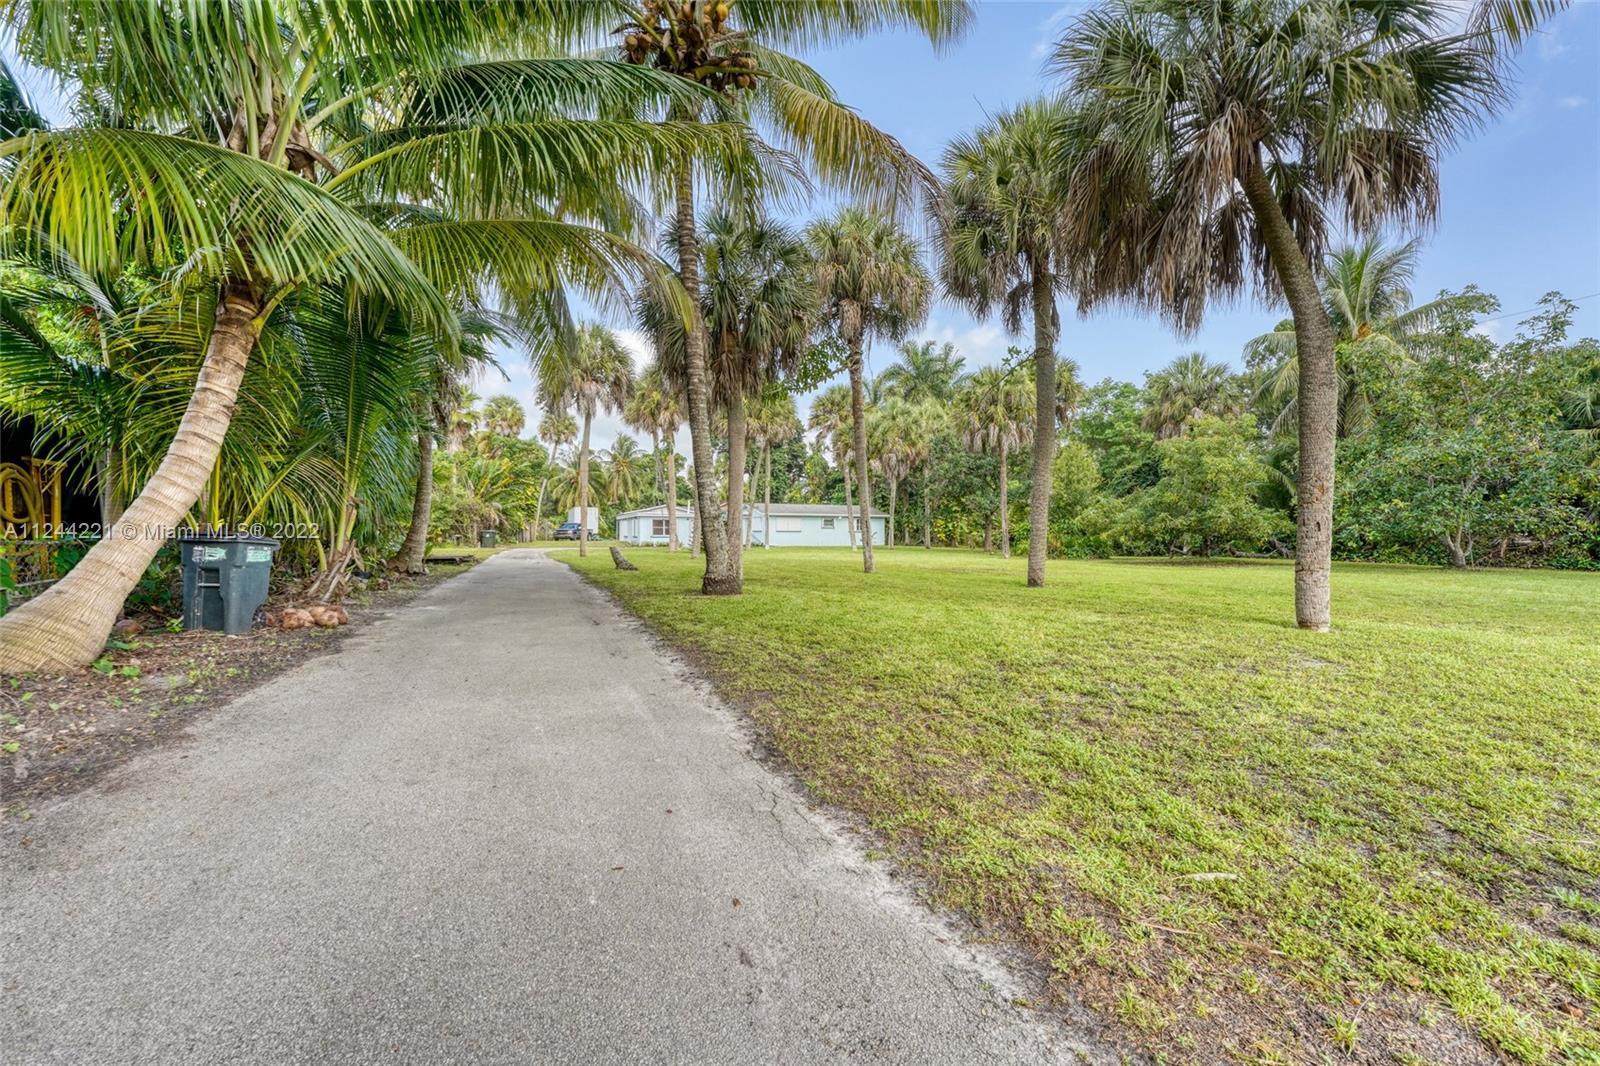 ULTRA UNIQUE PROPERTY IN THE HEART OF FORT LAUDERDALE. ONE ACRE OF LAND. ZONED RD 10.2. BUILD UP TO 